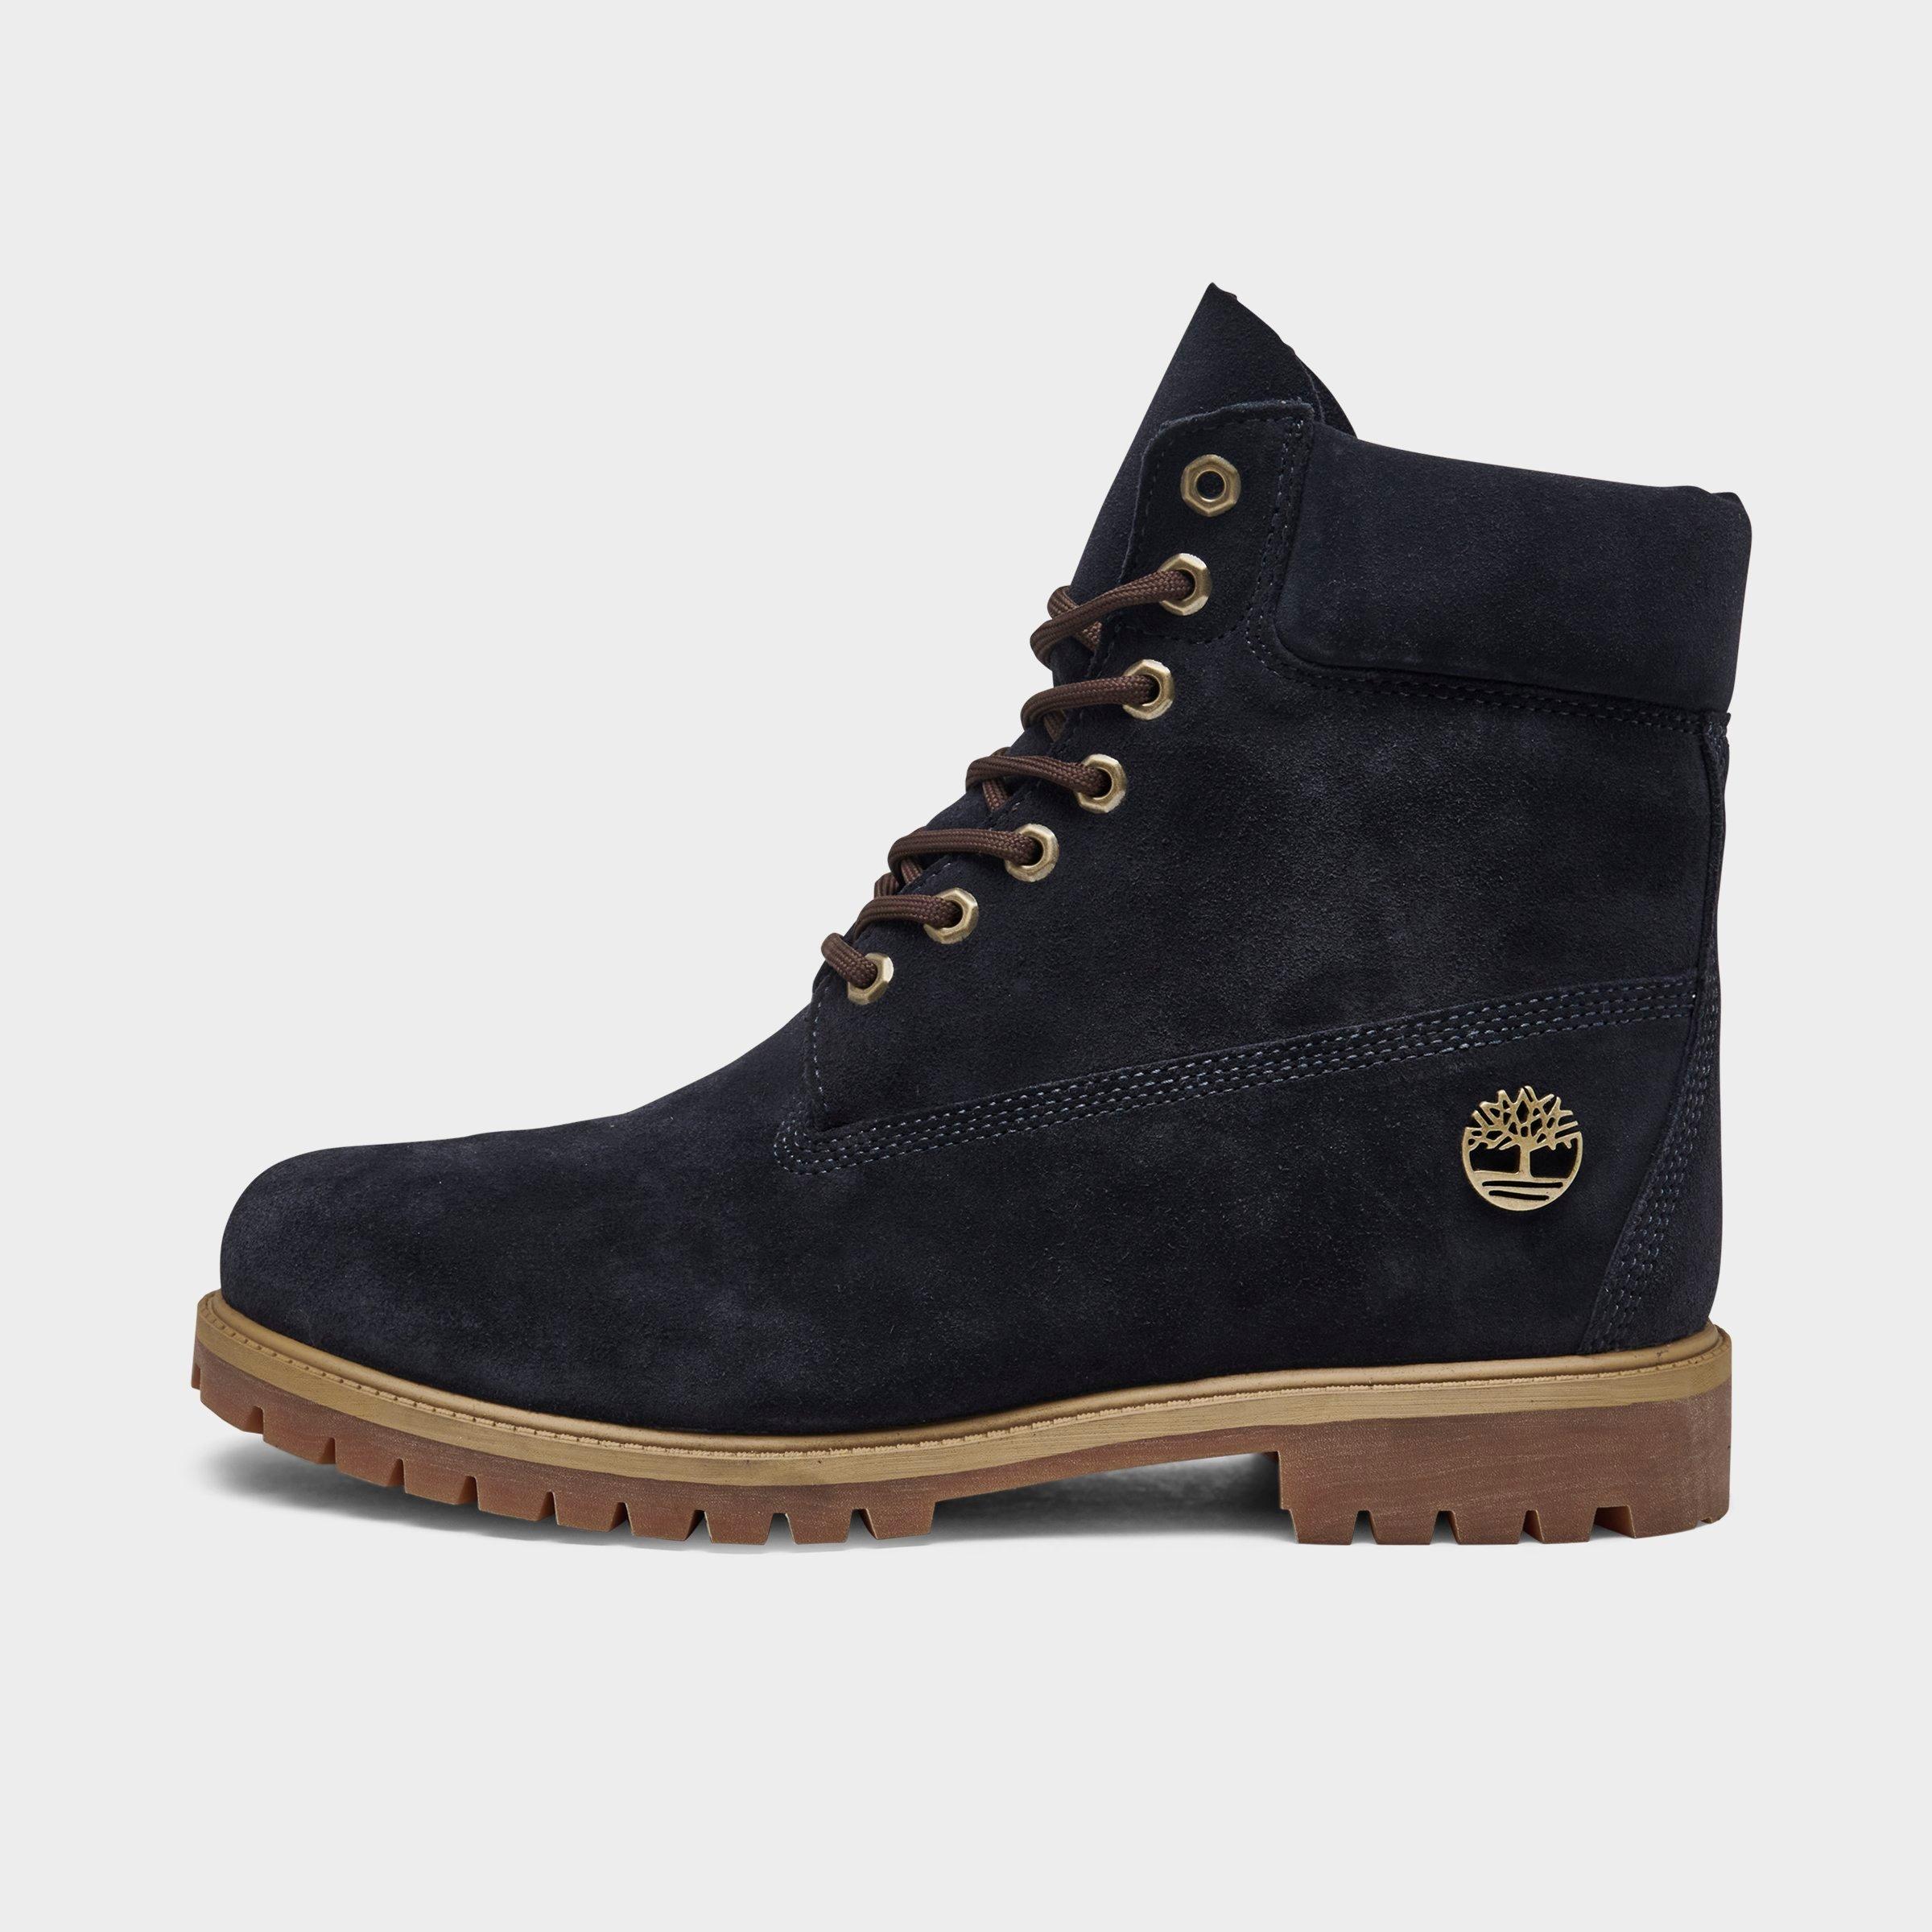 Timberland Boots, Shoes & Apparel | JD Sports